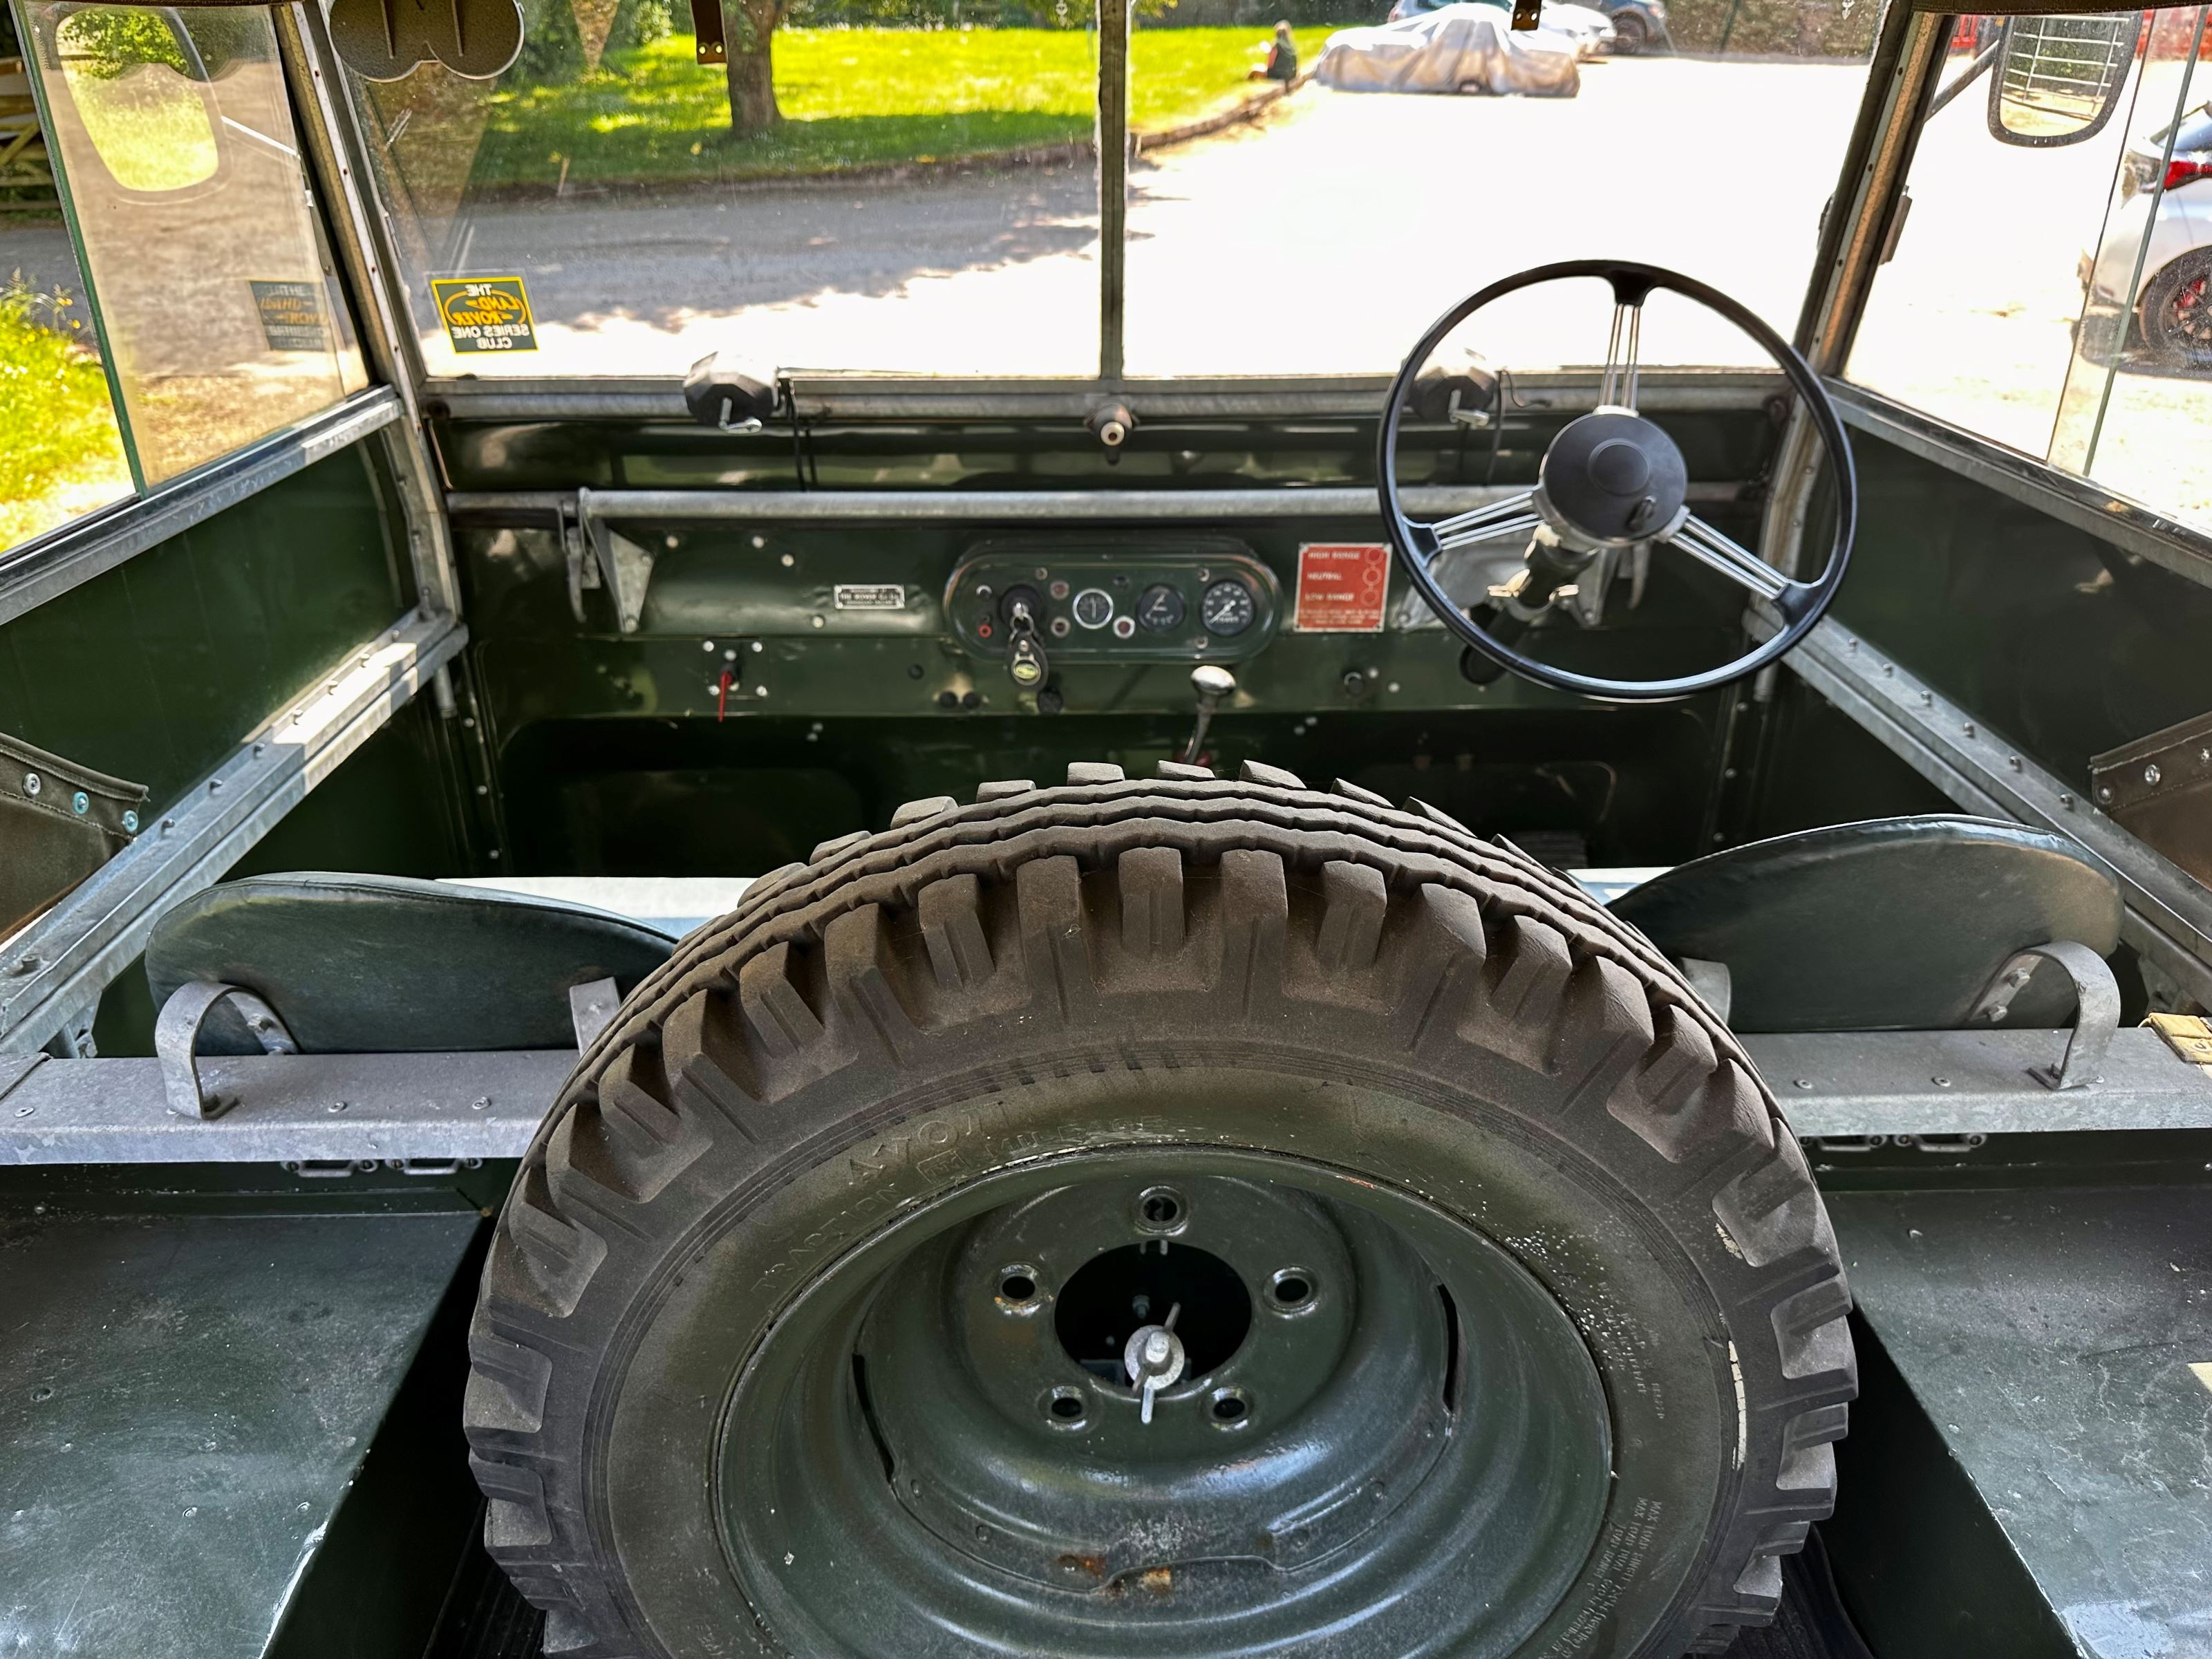 Land rover series 1 fo3gm9clefe7tpu4kbhsx